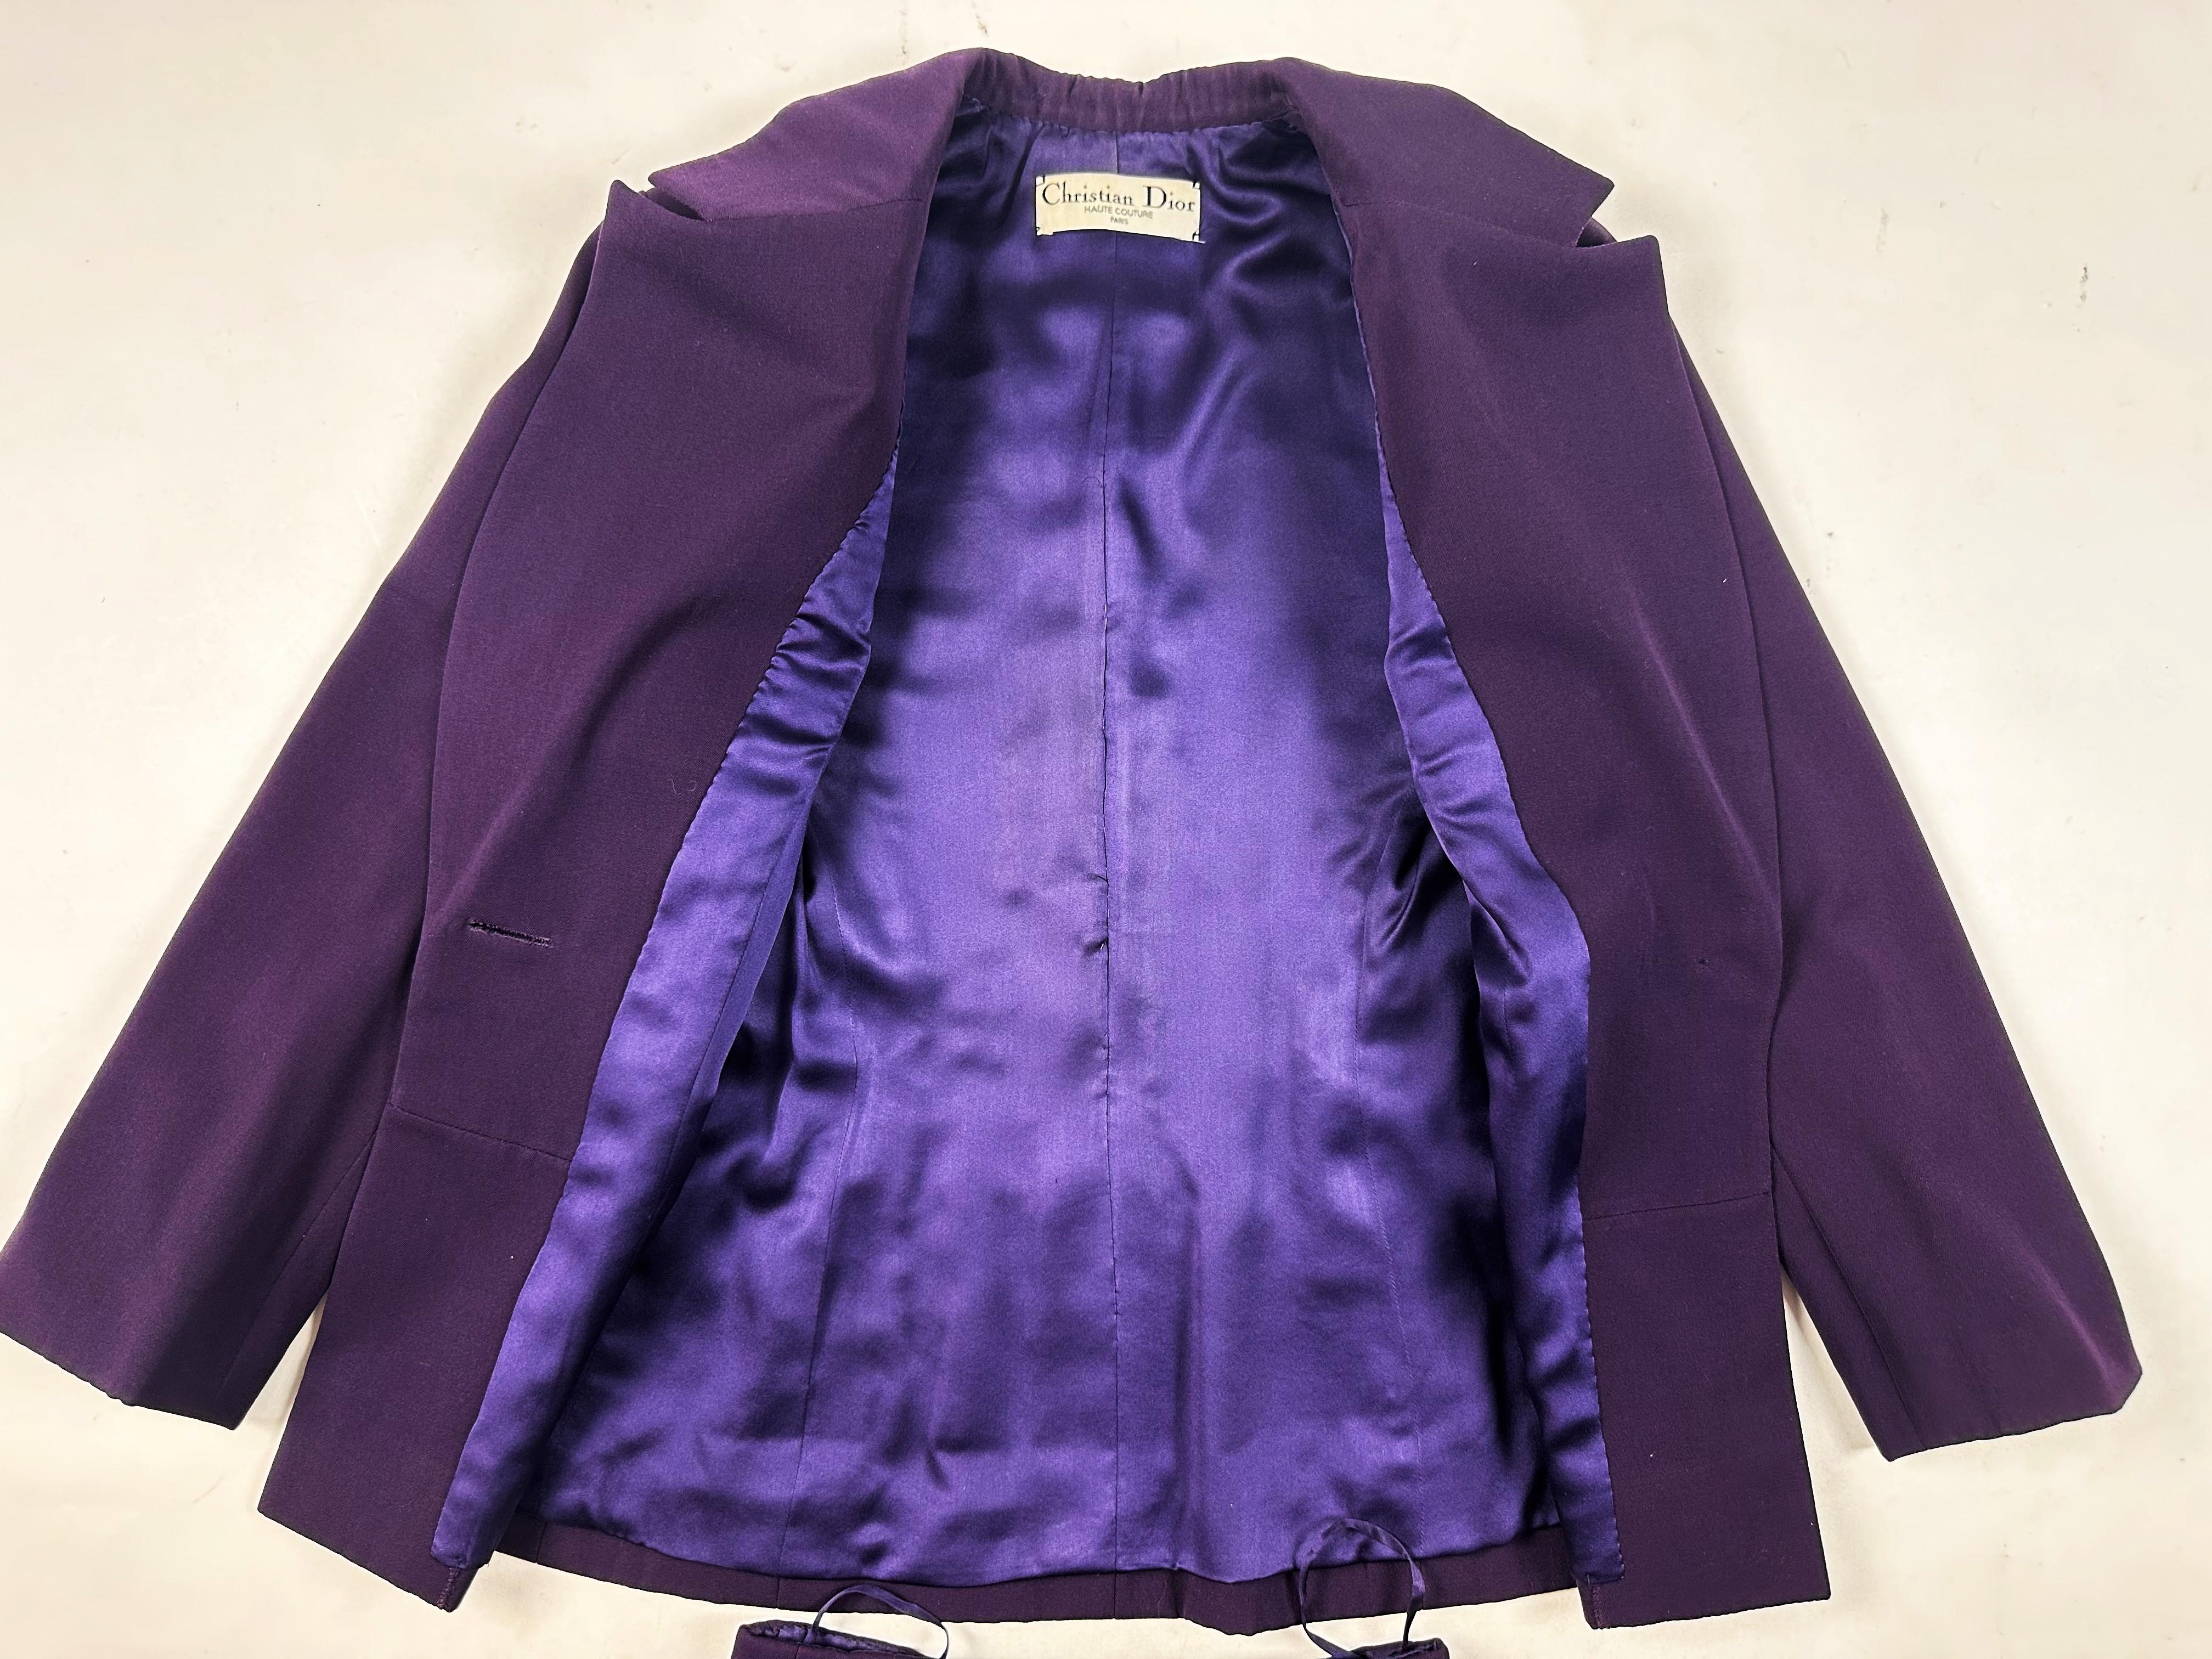 Skirt suit by Gianfranco Ferré for Christian Dior Haute Couture Circa 1995 For Sale 9